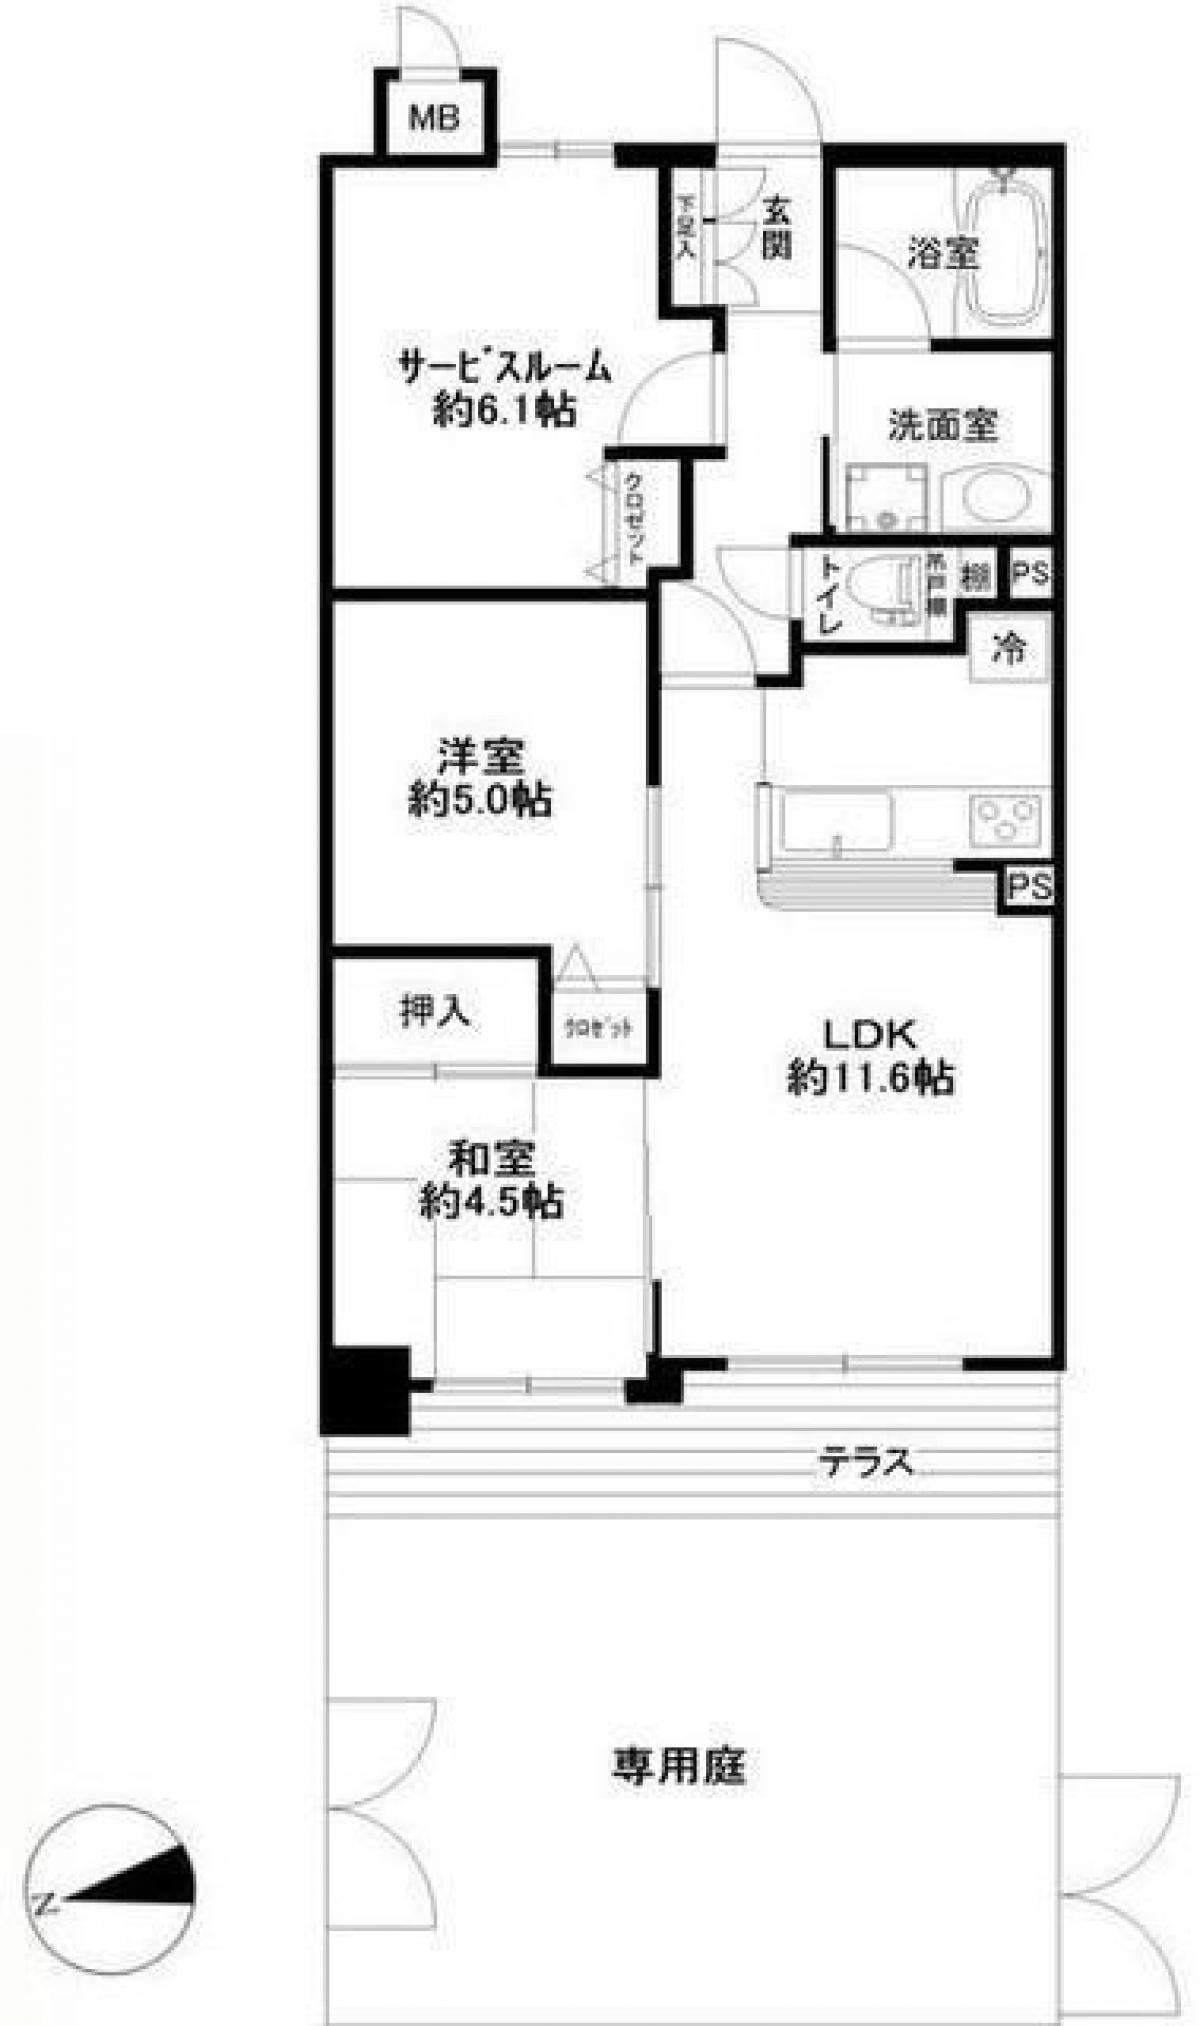 Picture of Apartment For Sale in Kunitachi Shi, Tokyo, Japan